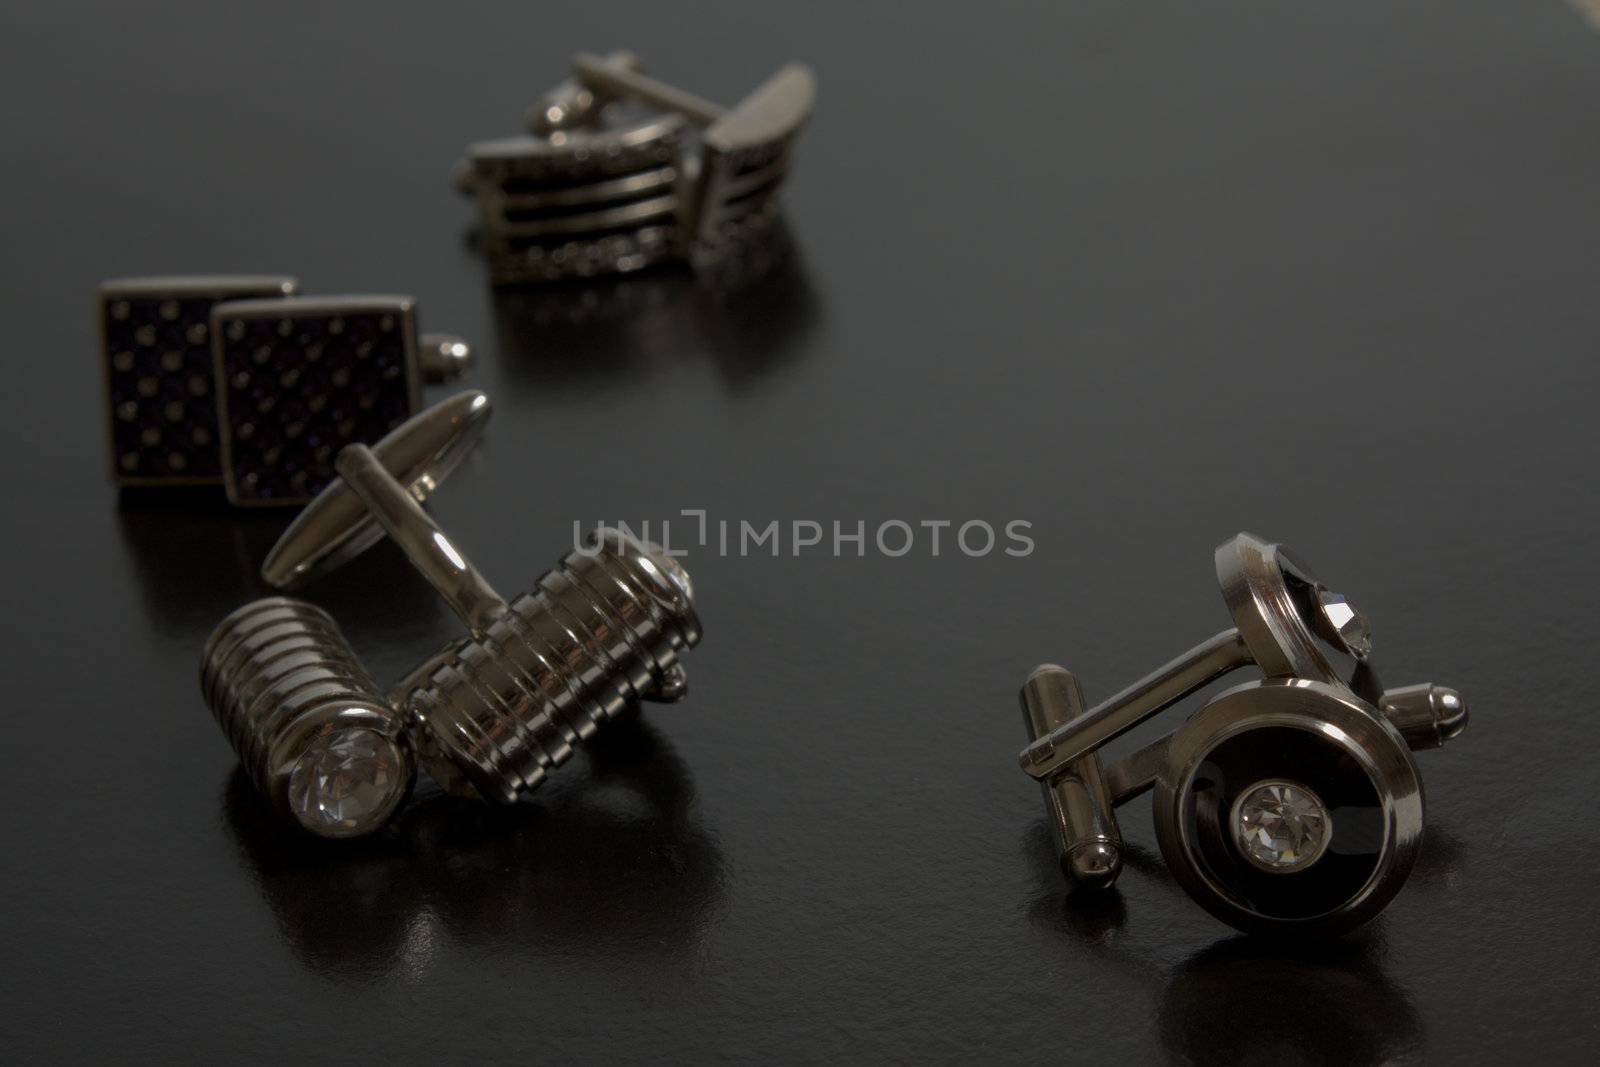 stainless steel cufflinks on the black background